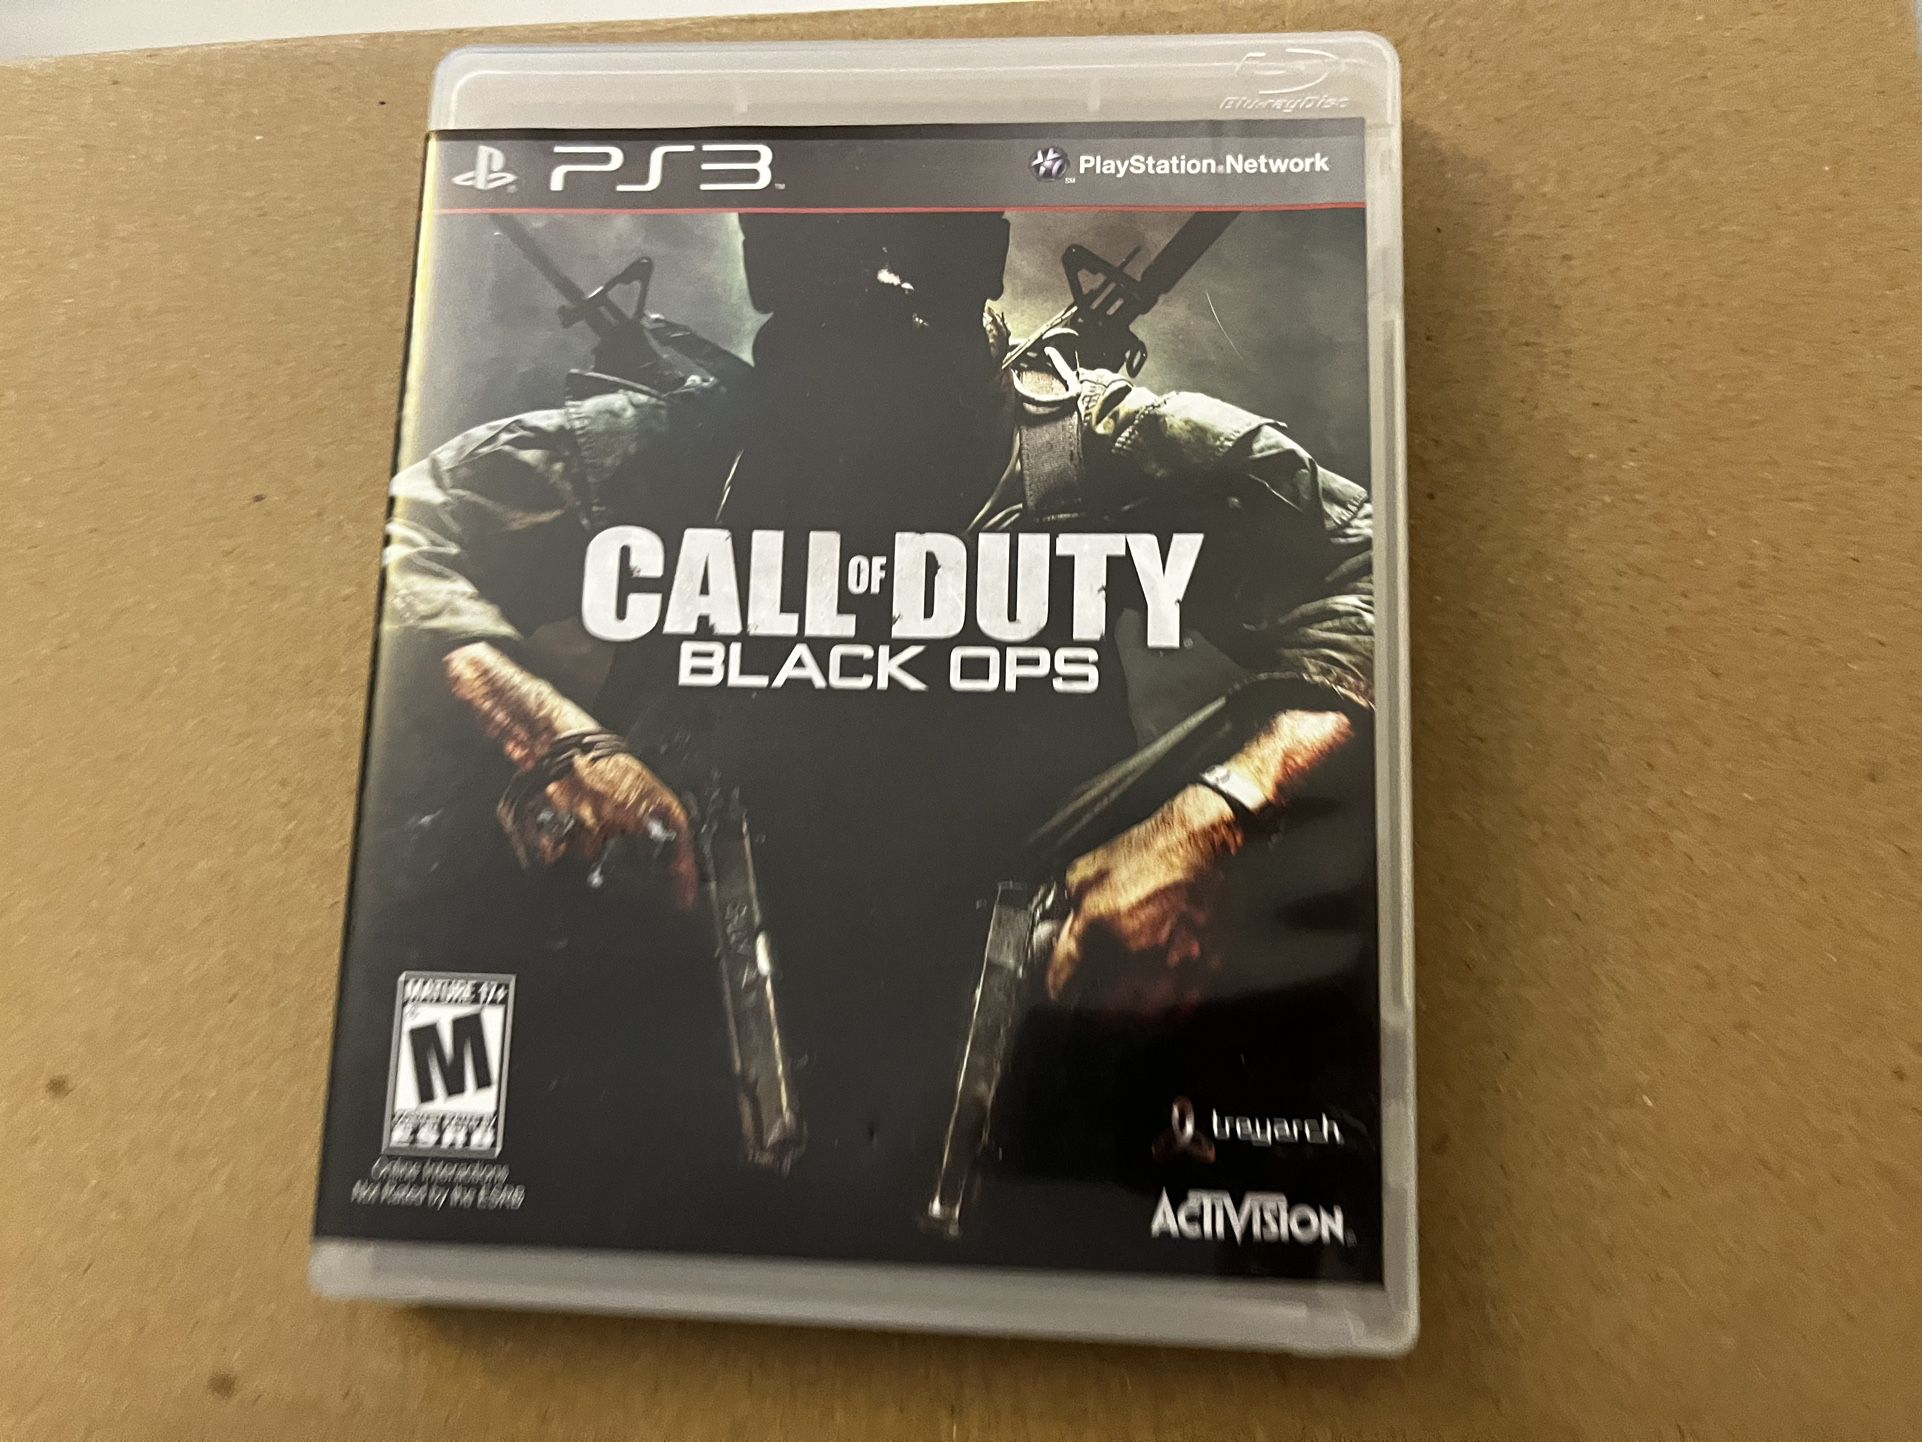 Call Of Duty Black Ops PS3 